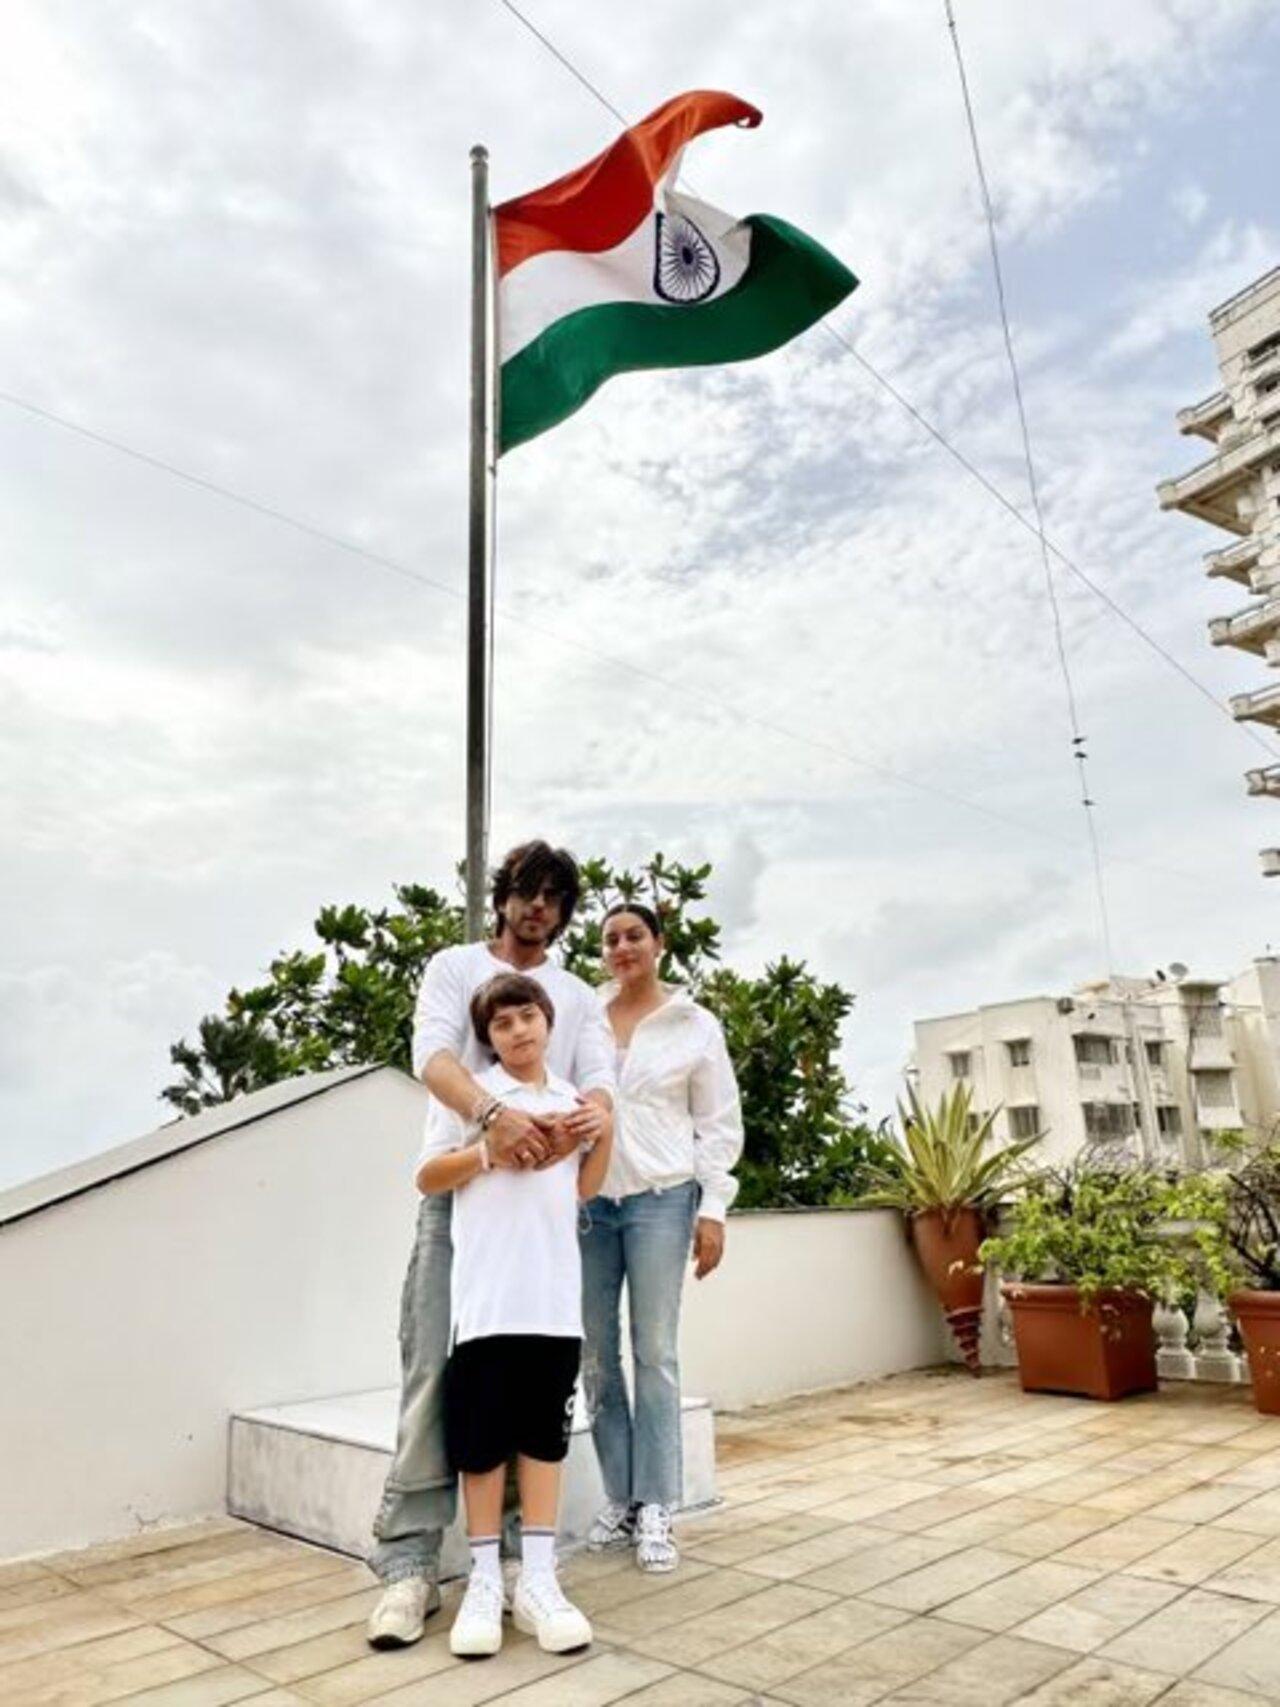 Shah Rukh Khan and Gauri Khan hoisted the tricolour with AbRam Khan. Sharing a picture, the superstar wrote, 